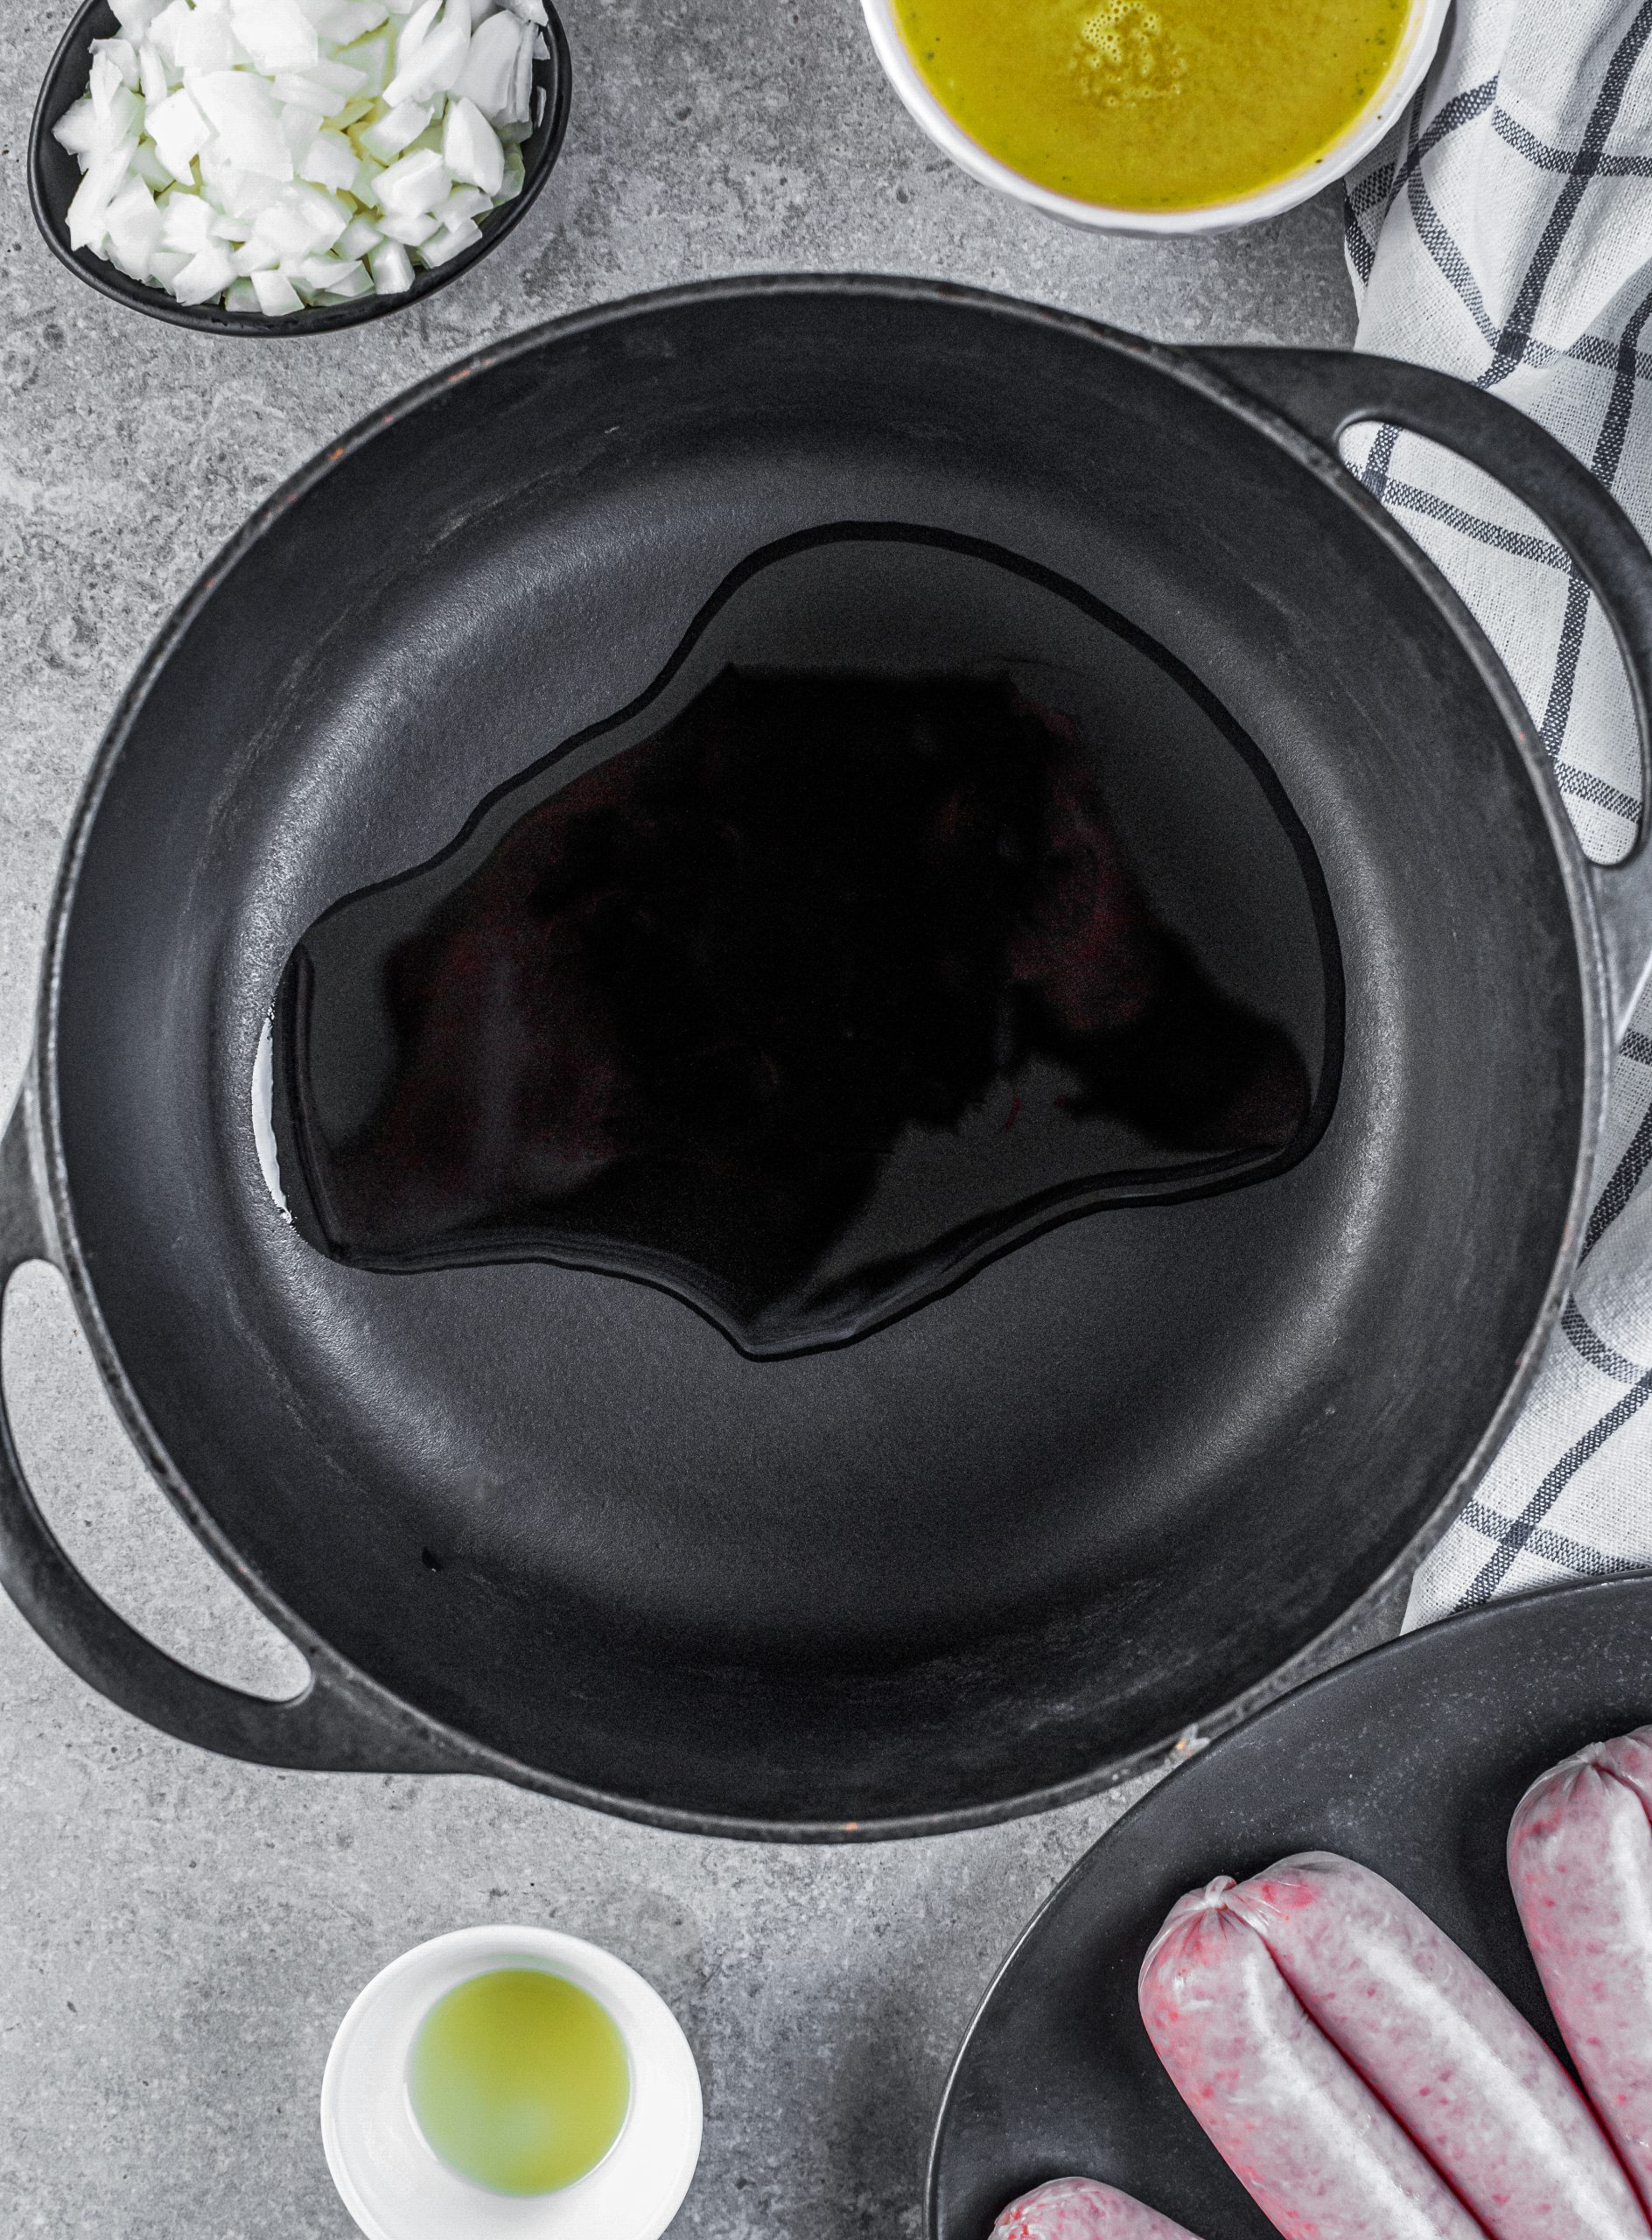 Place the oil in a skillet over medium heat on the stove.